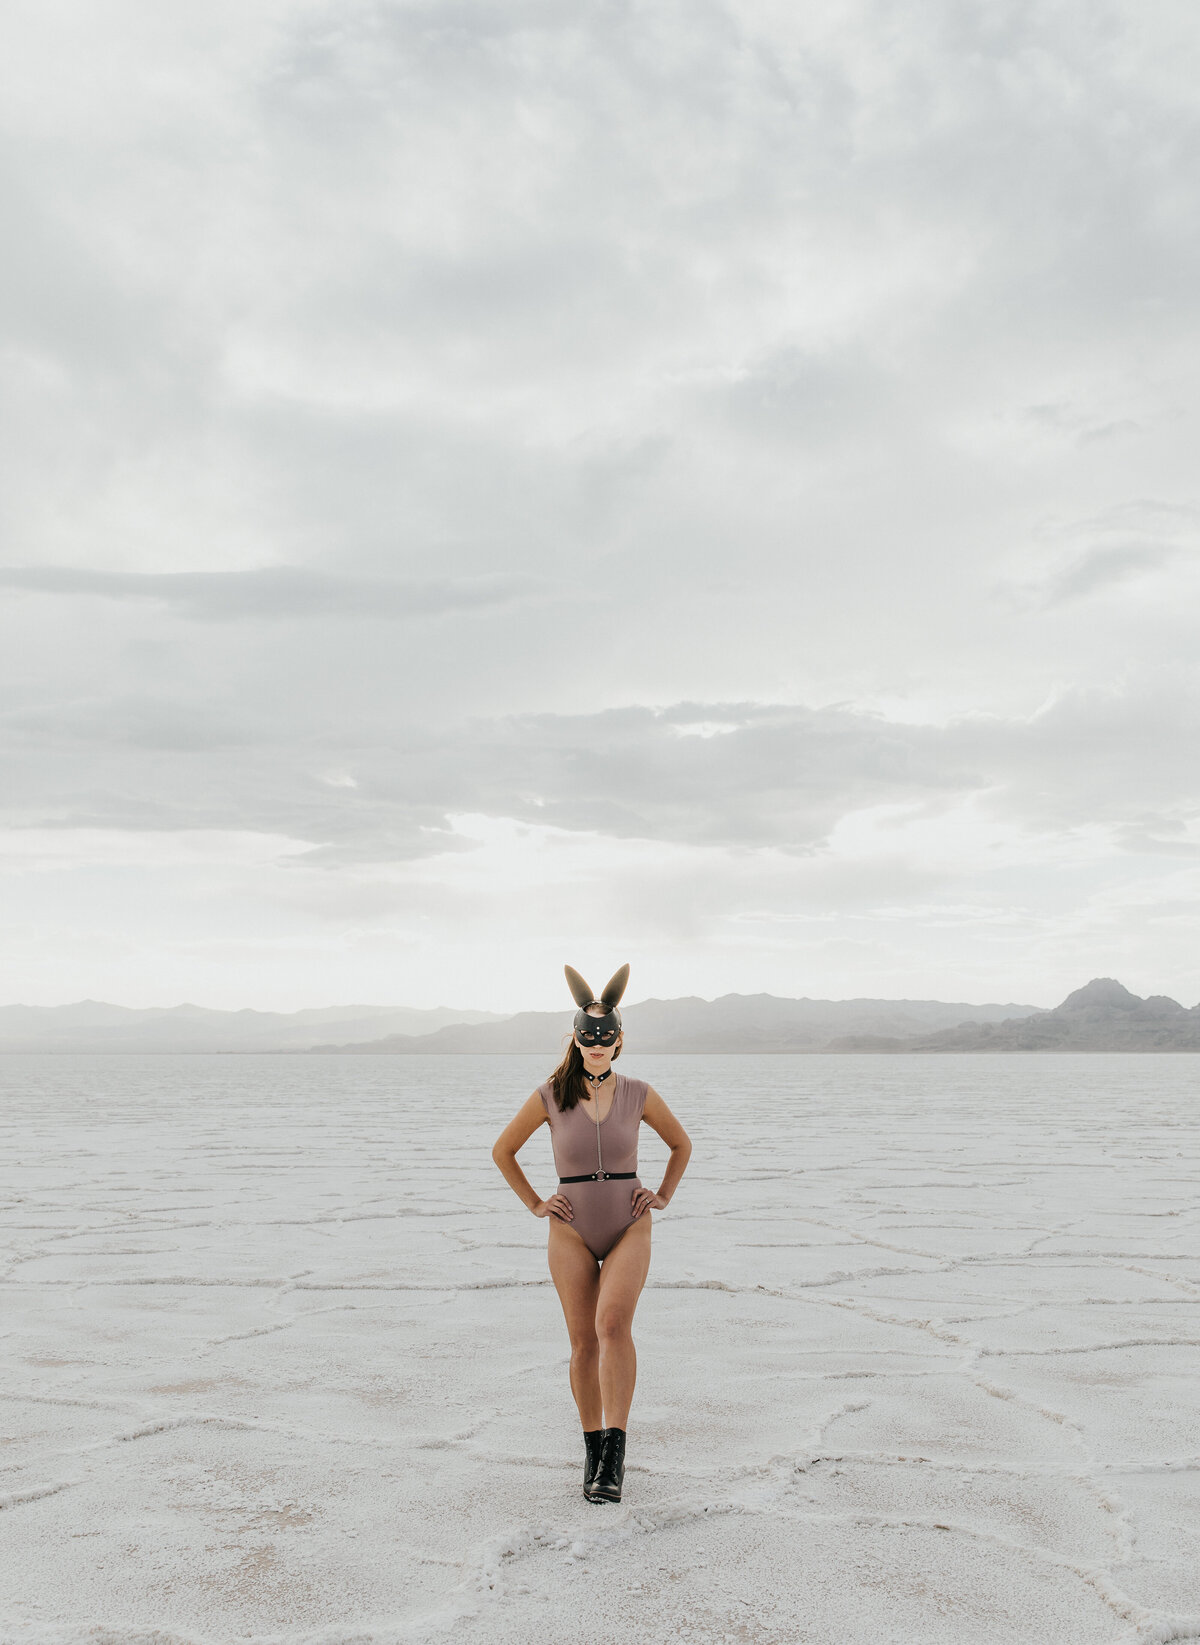 A woman walking towards the camera with her hands on her hips and a leather bunny mask on her face.